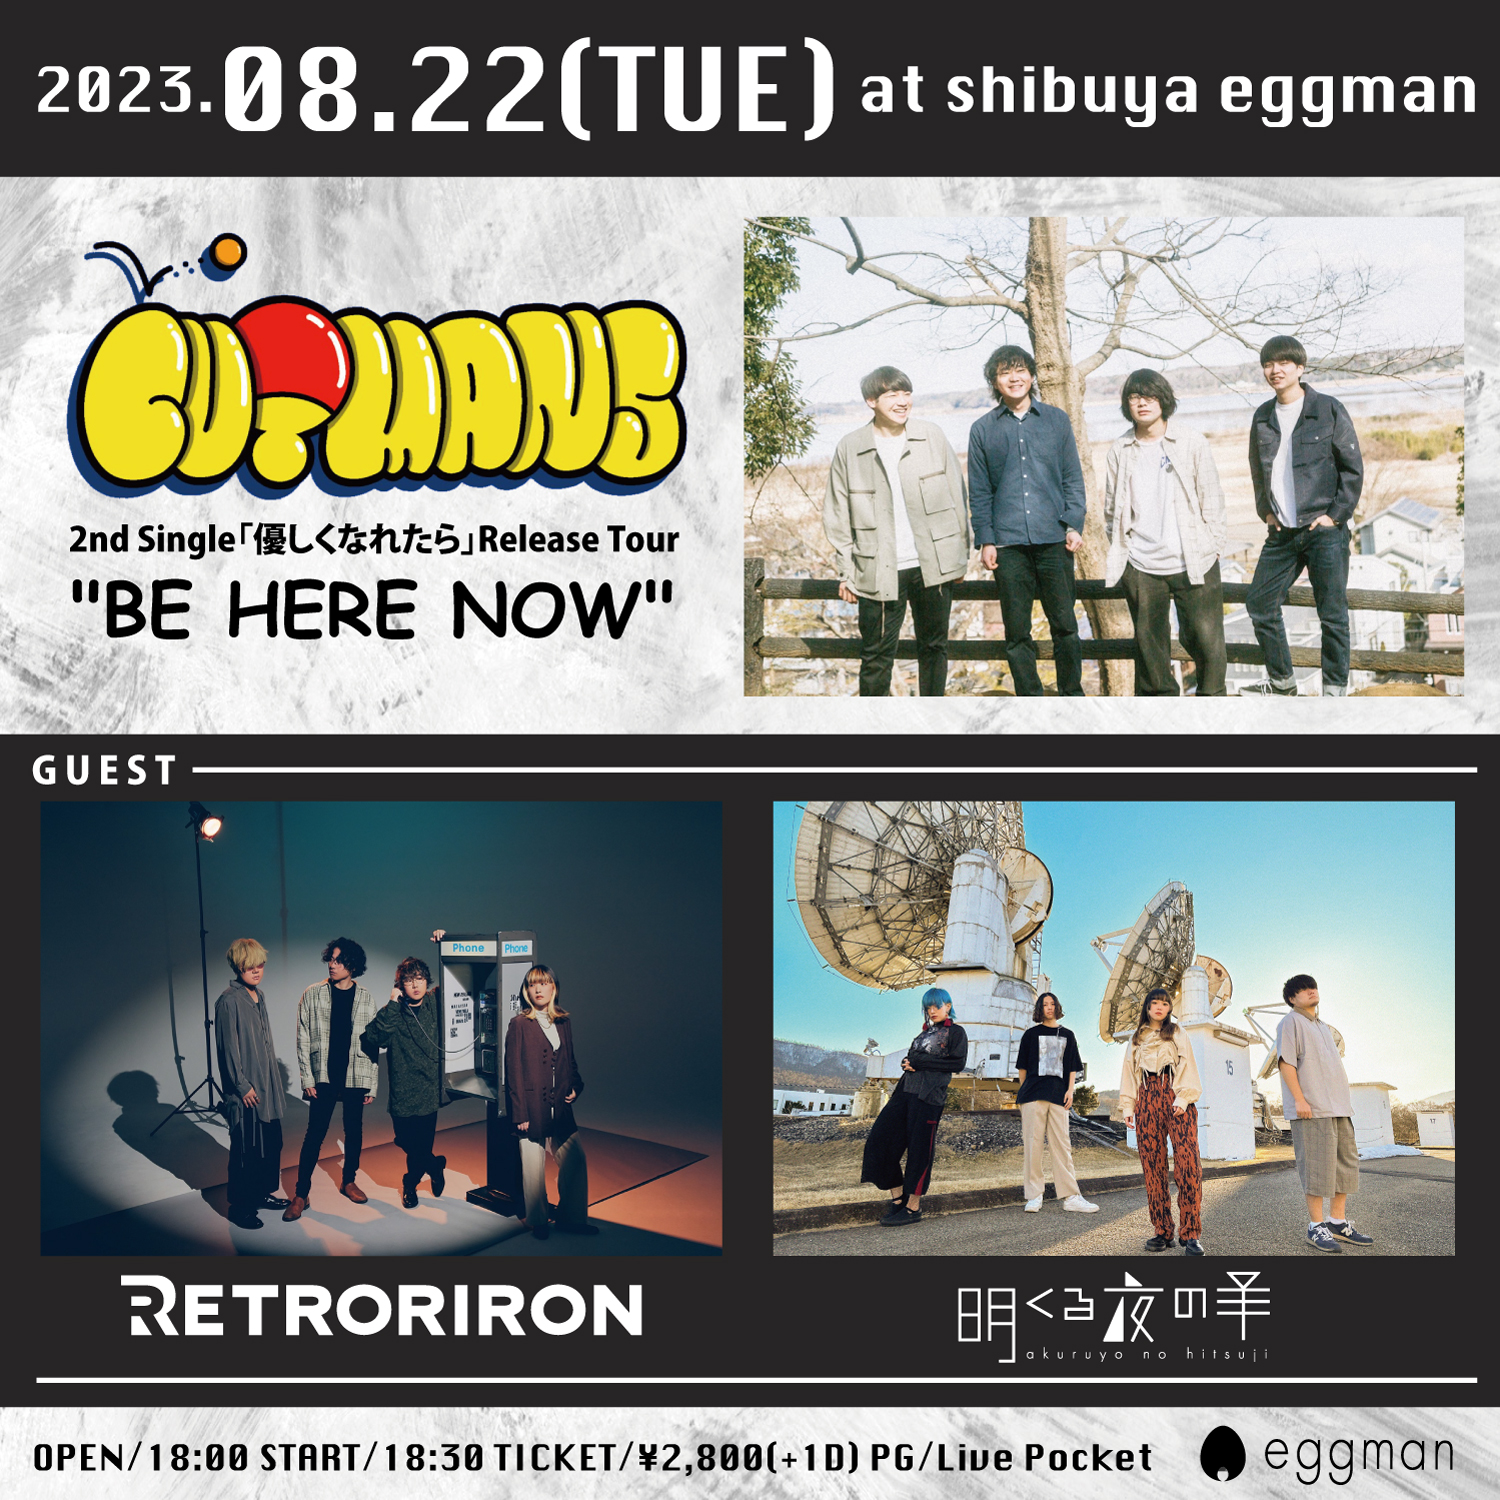 CUTMANS 2nd Single「優しくなれたら」Release Tour “BE HERE NOW”